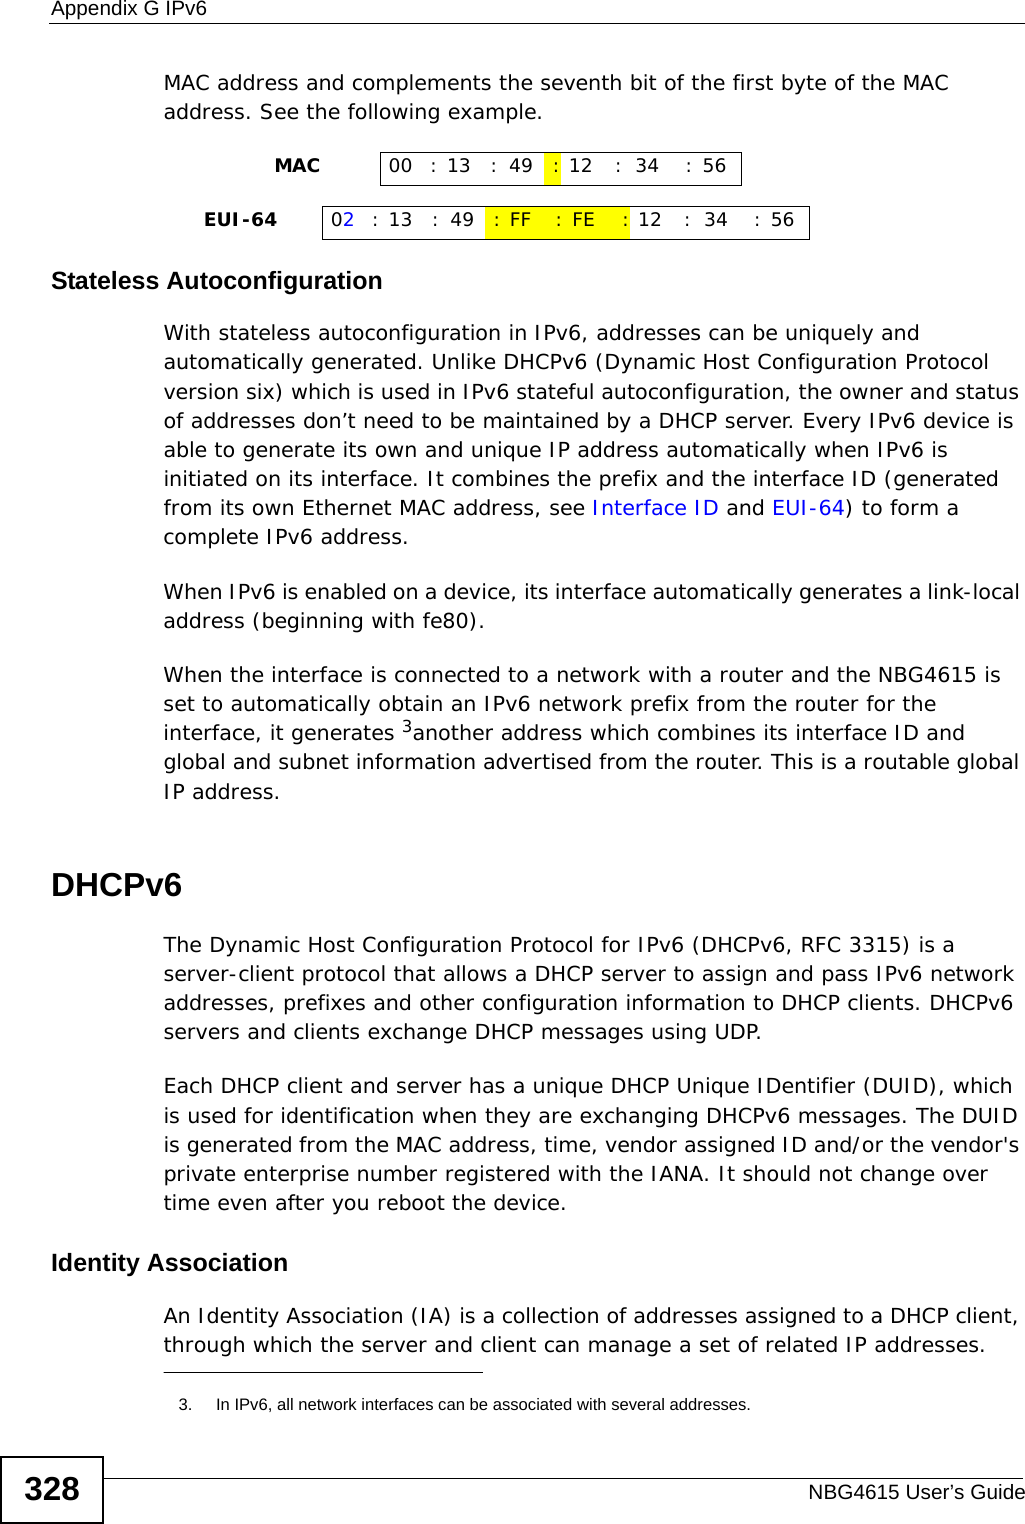 Appendix G IPv6NBG4615 User’s Guide328MAC address and complements the seventh bit of the first byte of the MAC address. See the following example. Stateless AutoconfigurationWith stateless autoconfiguration in IPv6, addresses can be uniquely and automatically generated. Unlike DHCPv6 (Dynamic Host Configuration Protocol version six) which is used in IPv6 stateful autoconfiguration, the owner and status of addresses don’t need to be maintained by a DHCP server. Every IPv6 device is able to generate its own and unique IP address automatically when IPv6 is initiated on its interface. It combines the prefix and the interface ID (generated from its own Ethernet MAC address, see Interface ID and EUI-64) to form a complete IPv6 address.When IPv6 is enabled on a device, its interface automatically generates a link-local address (beginning with fe80).When the interface is connected to a network with a router and the NBG4615 is set to automatically obtain an IPv6 network prefix from the router for the interface, it generates 3another address which combines its interface ID and global and subnet information advertised from the router. This is a routable global IP address.DHCPv6The Dynamic Host Configuration Protocol for IPv6 (DHCPv6, RFC 3315) is a server-client protocol that allows a DHCP server to assign and pass IPv6 network addresses, prefixes and other configuration information to DHCP clients. DHCPv6 servers and clients exchange DHCP messages using UDP.Each DHCP client and server has a unique DHCP Unique IDentifier (DUID), which is used for identification when they are exchanging DHCPv6 messages. The DUID is generated from the MAC address, time, vendor assigned ID and/or the vendor&apos;s private enterprise number registered with the IANA. It should not change over time even after you reboot the device.Identity AssociationAn Identity Association (IA) is a collection of addresses assigned to a DHCP client, through which the server and client can manage a set of related IP addresses.                 MAC 00 : 13 : 49 :12 : 34 :56     EUI-64 02:13 :49 :FF :FE :12 : 34 :563. In IPv6, all network interfaces can be associated with several addresses. 